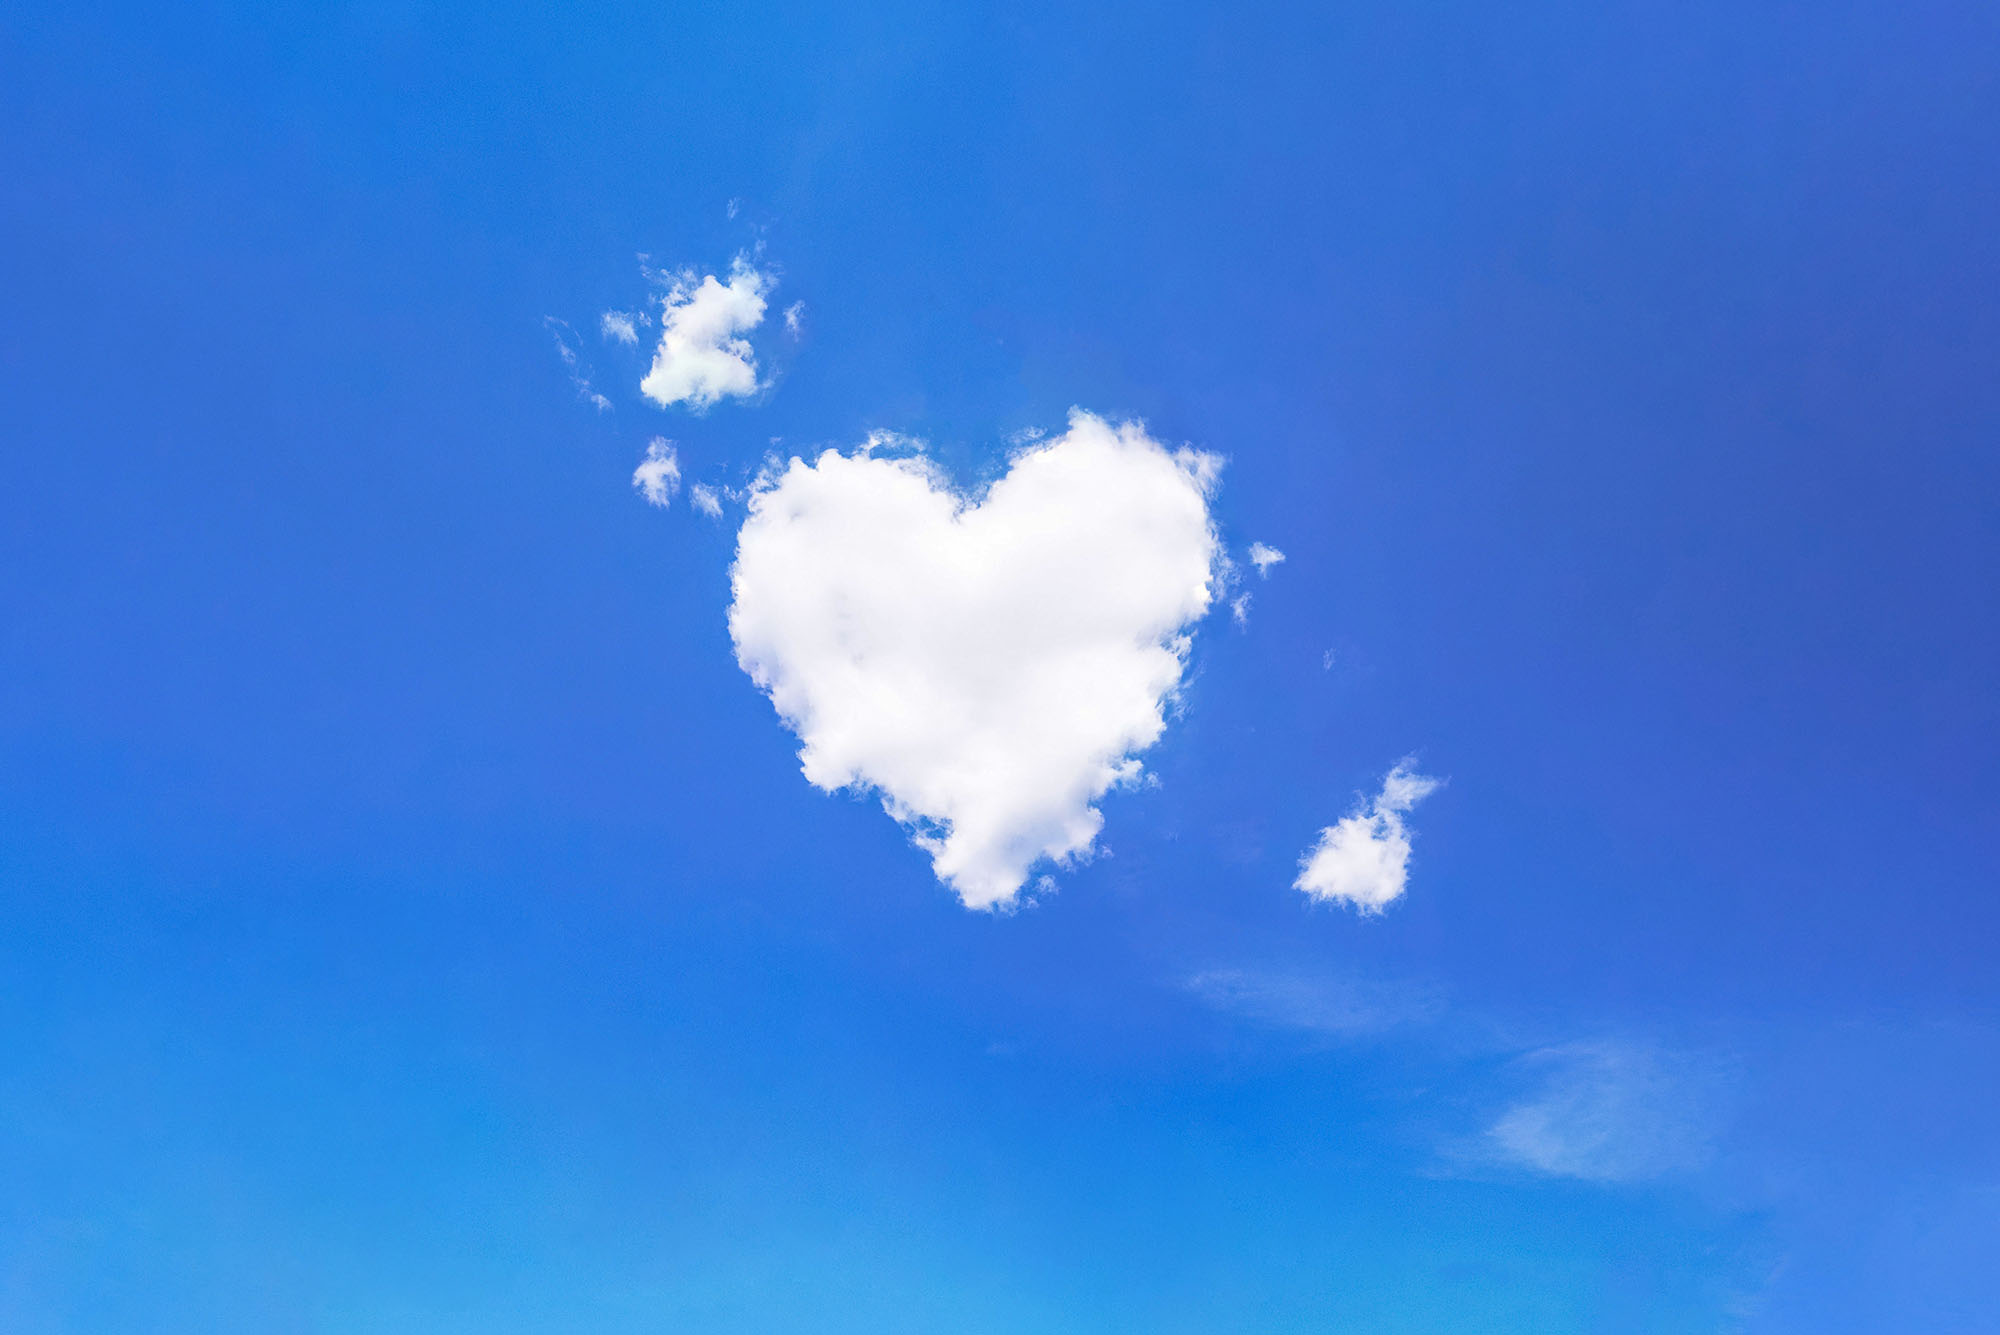 photo of a white, heart shaped cloud in a blue sky.